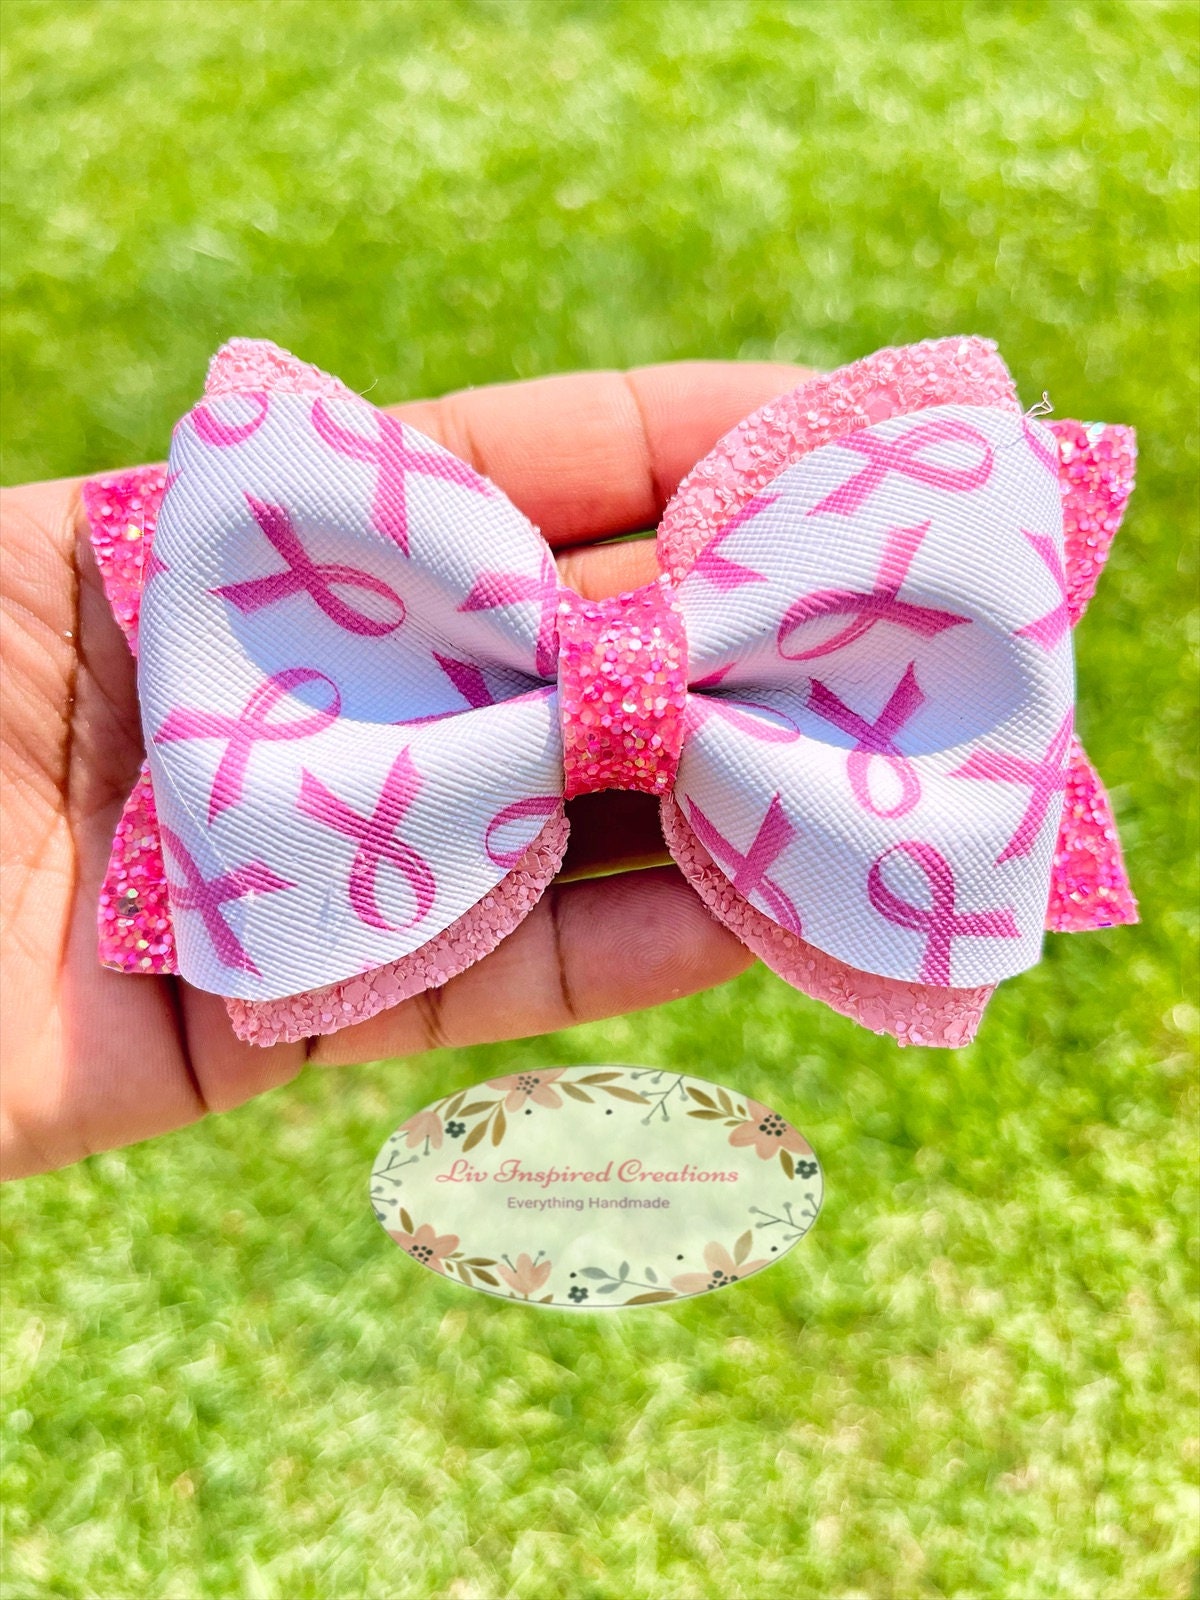 Korker Silly Girl hair clips, hair bow, korker bows, pigtail bows, bow  sets